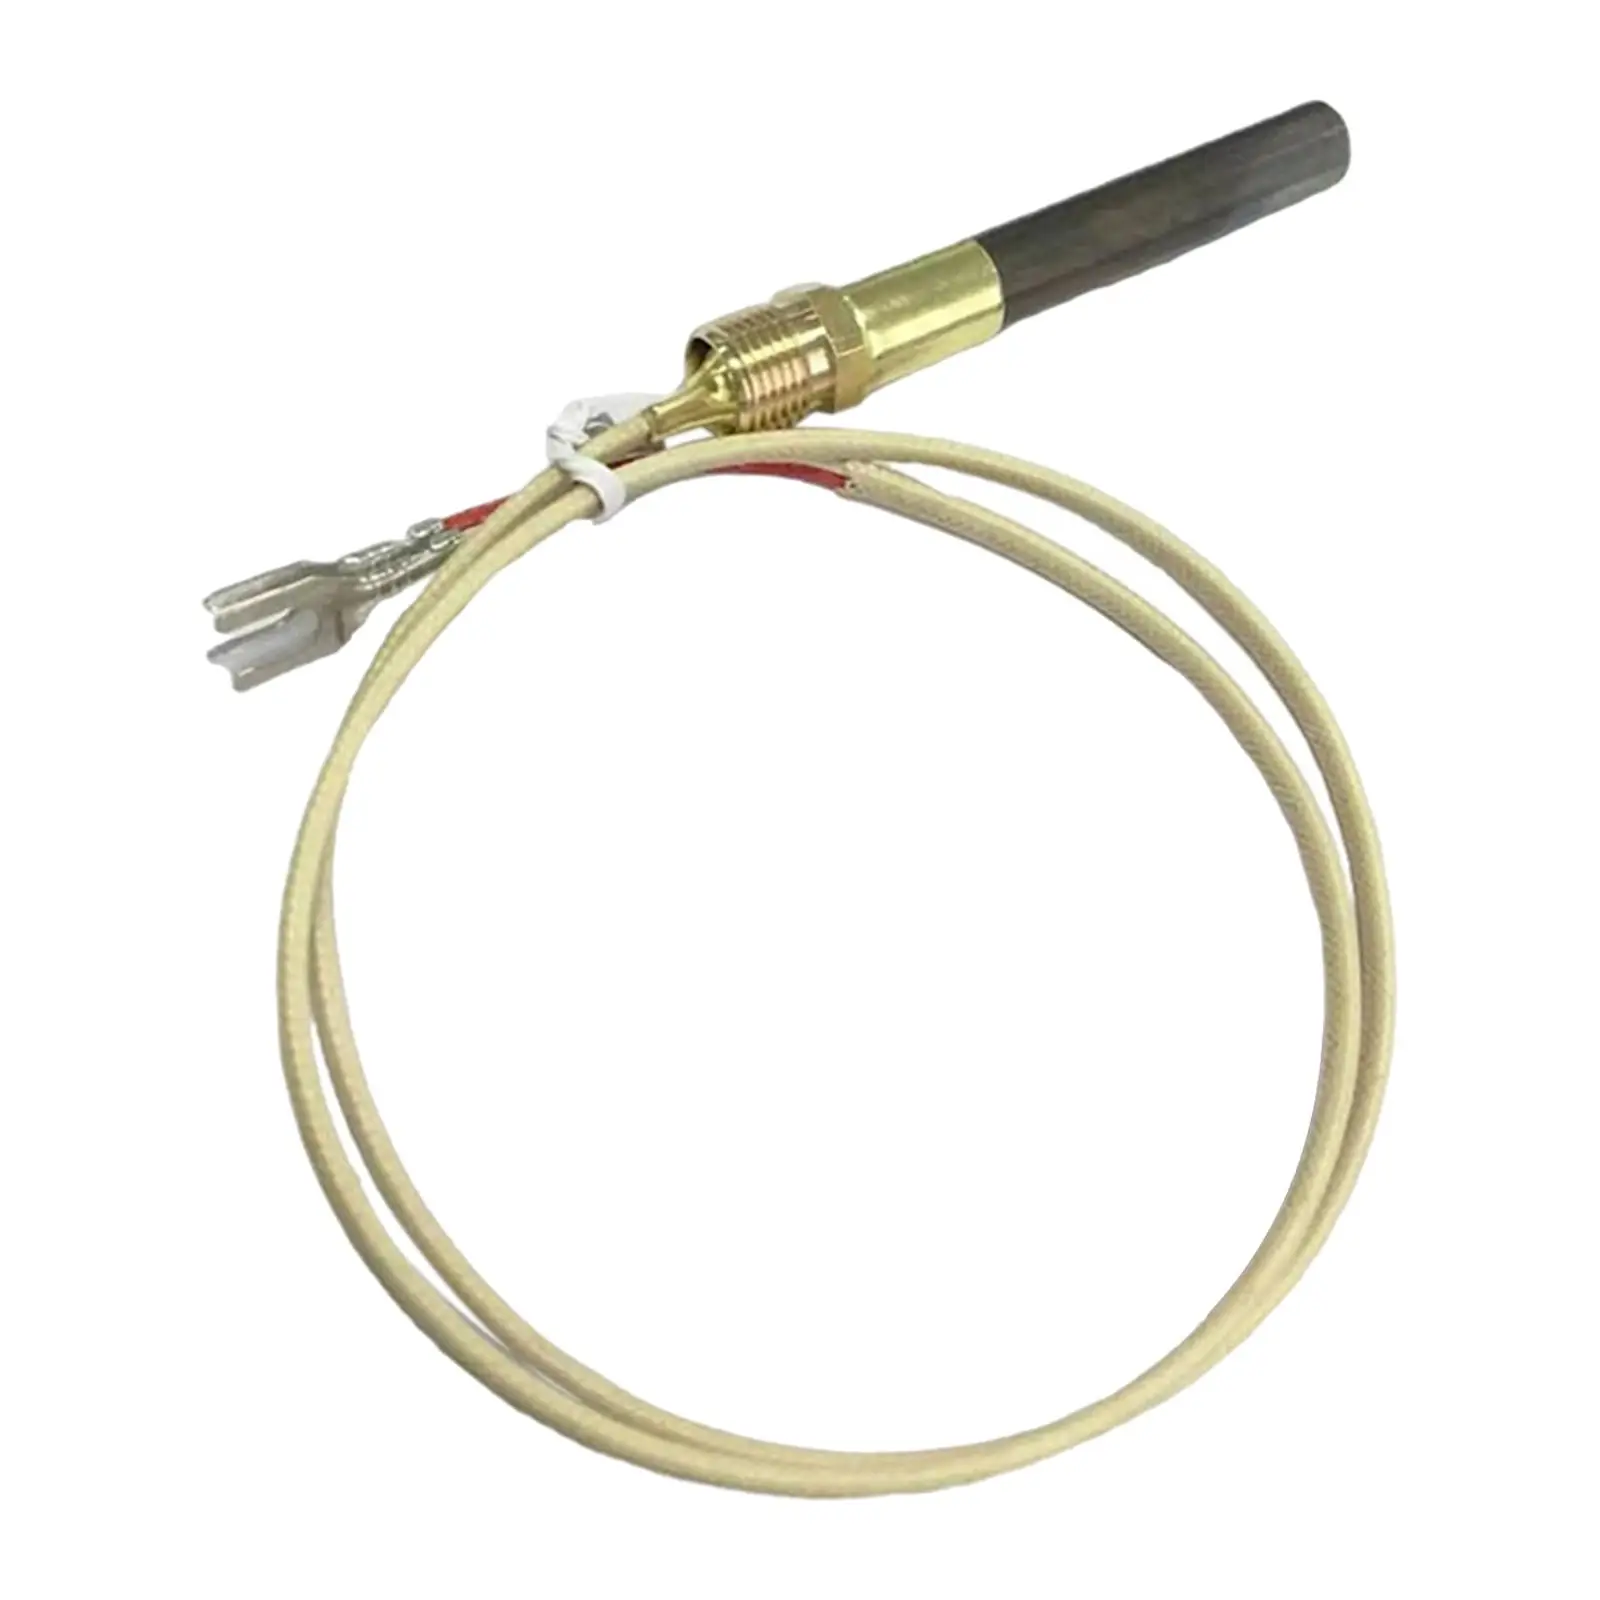 Gas Fireplace Thermopile Thermogenerator Lightweight Durable Heater Thermocouple for Heater Fireplace Brazier Oven Replace Parts